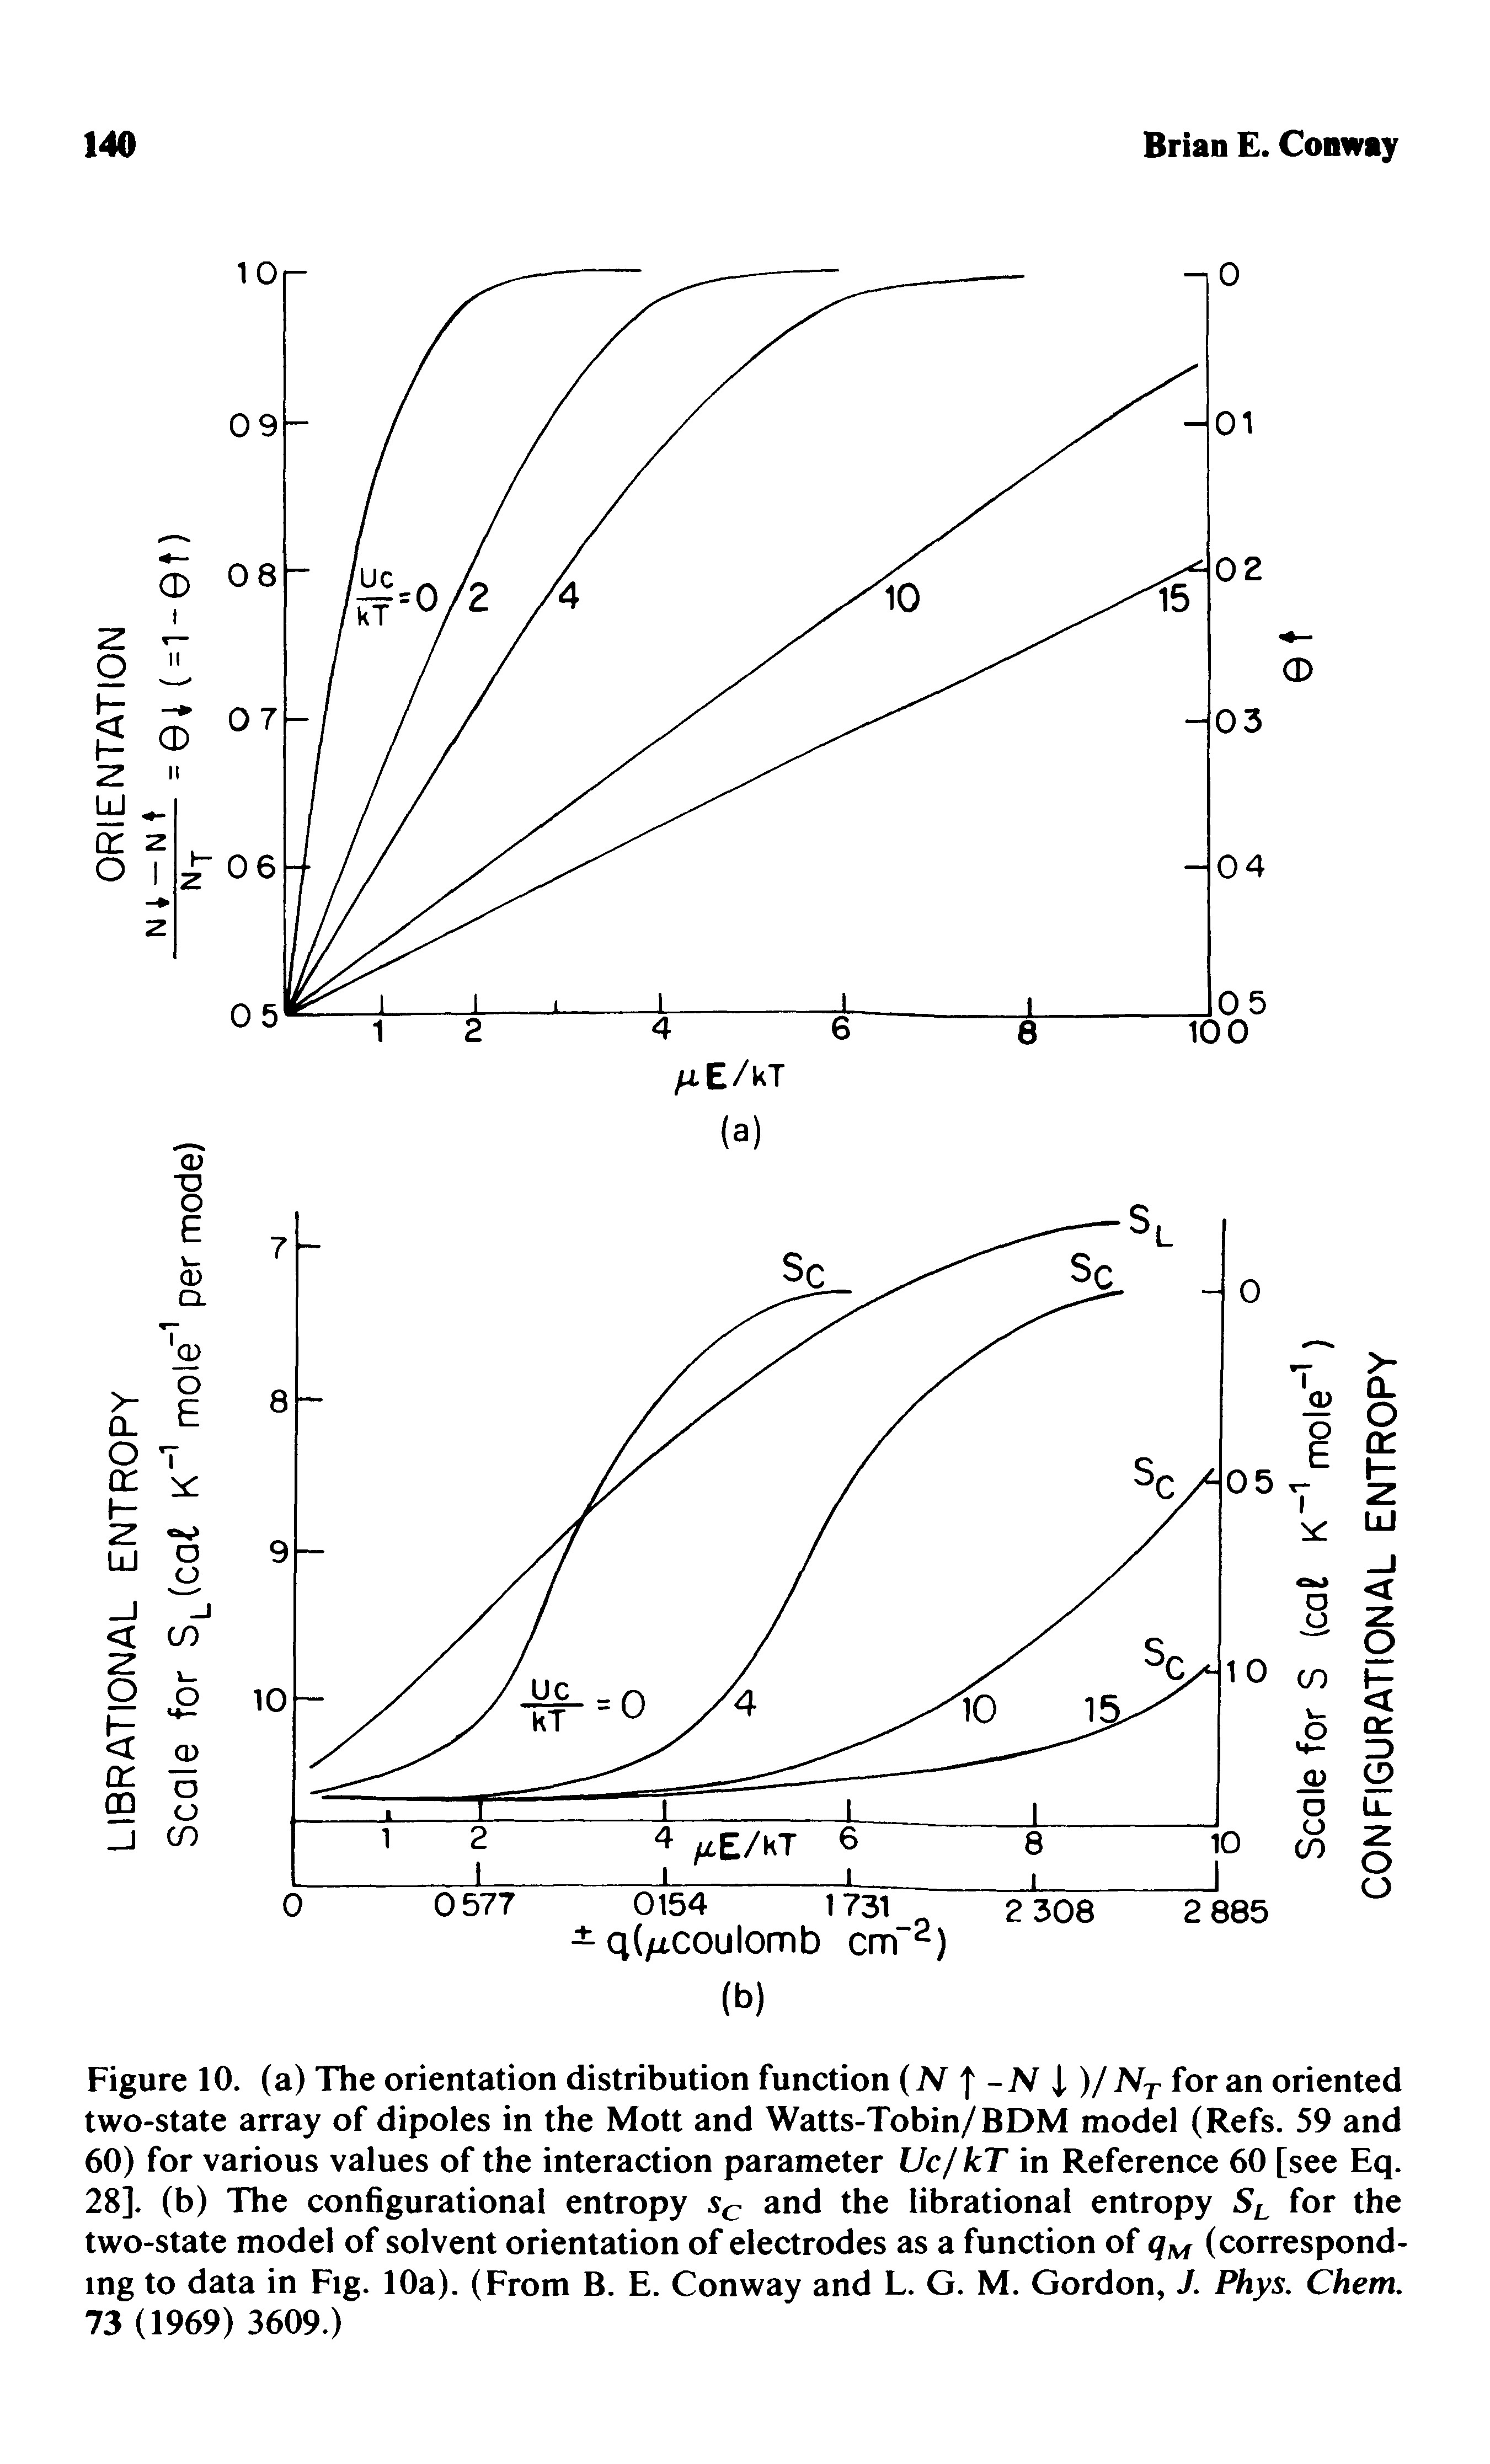 Figure 10. (a) The orientation distribution function (TV f -N i )/TVr for an oriented two-state array of dipoles in the Mott and Watts-Tobin/BDM model (Refs. 59 and 60) for various values of the interaction parameter Vc/ kT in Reference 60 [see Eq. 28]. (b) The configurational entropy and the librational entropy 5 for the two-state model of solvent orientation of electrodes as a function of (corresponding to data in Fig. 10a). (From B. E. Conway and L. G. M. Gordon, J. Phys. Chem. 73 (1969) 3609.)...